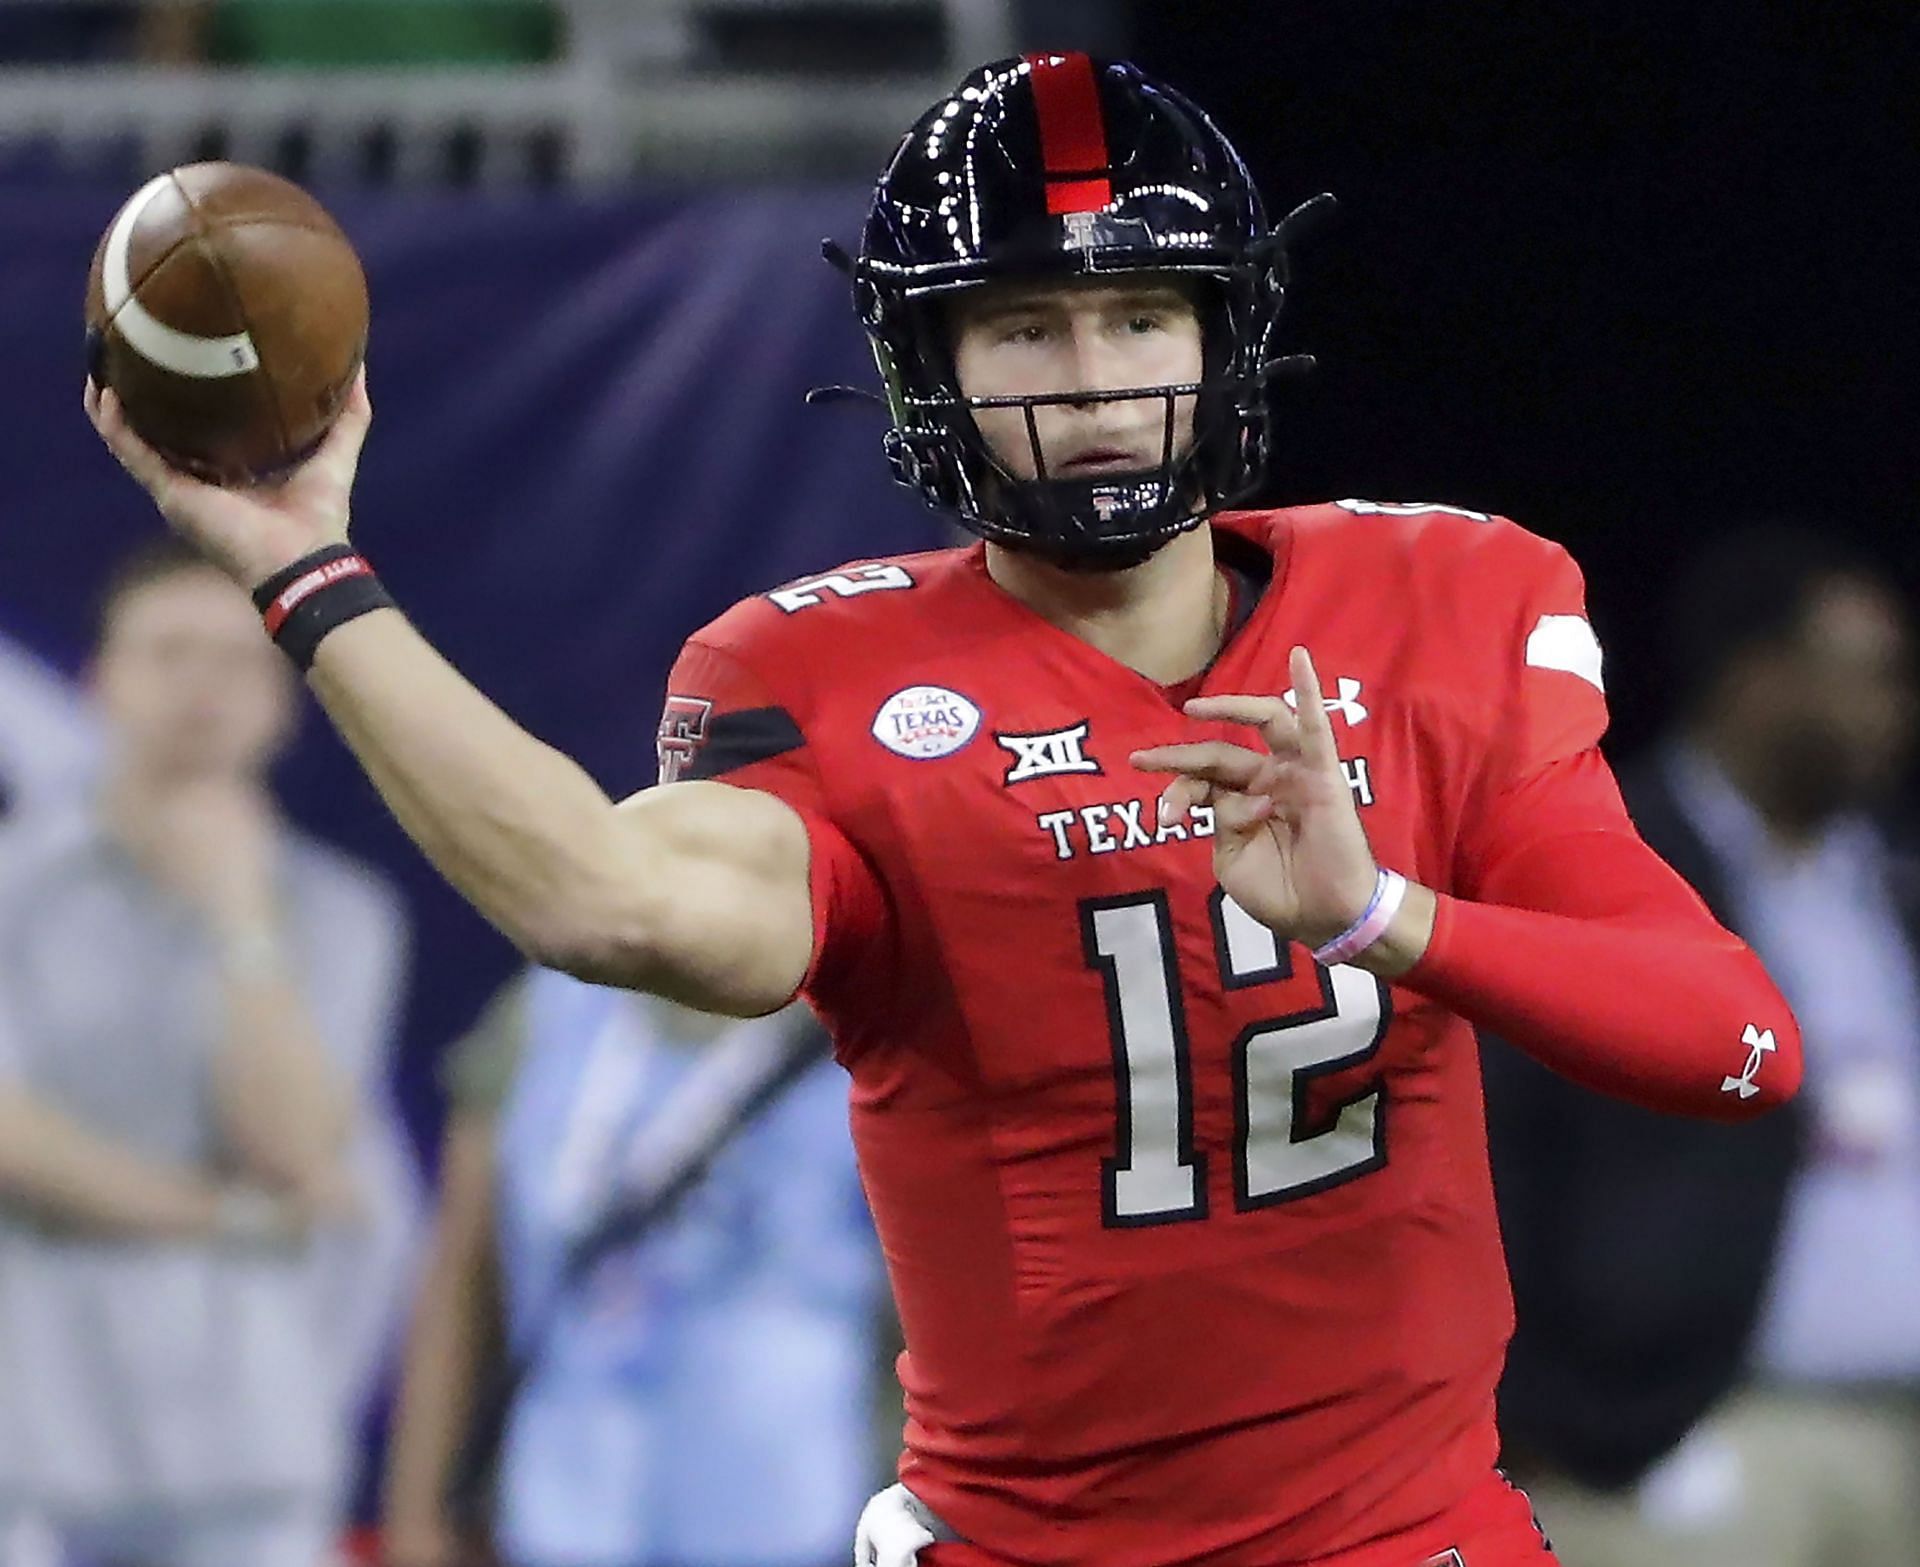 He was the man - Former Texas Tech baseball star reminiscences about Patrick  Mahomes' incredible multi-sport athletic ability in college